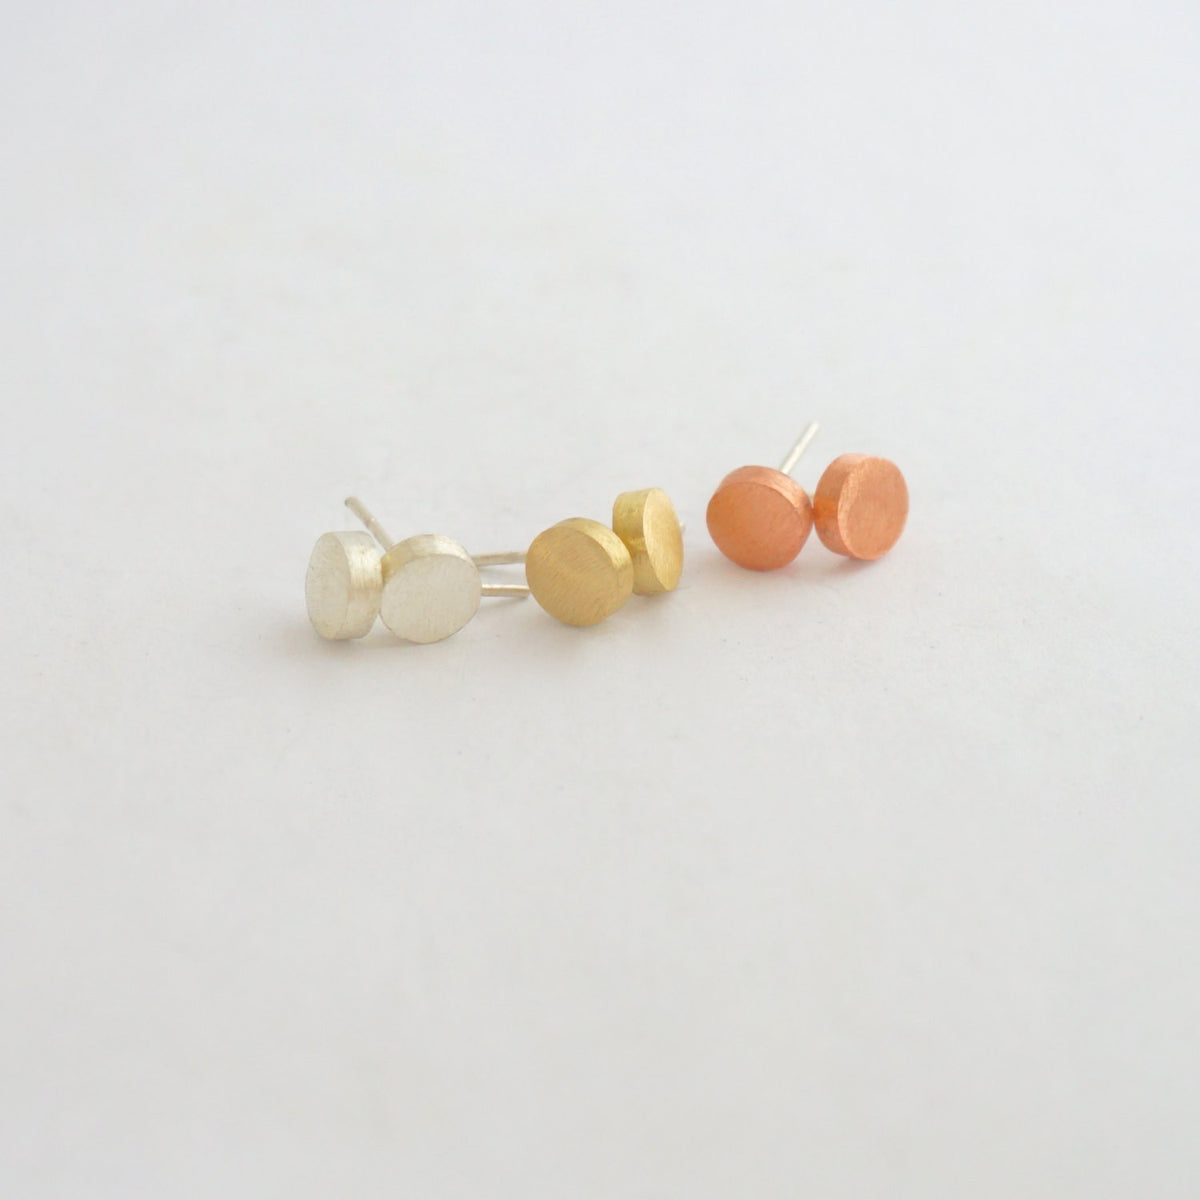 Chic Styled Set of Three Hand-Made Circle Dot Stud Earrings - 0167 - Virginia Wynne Designs